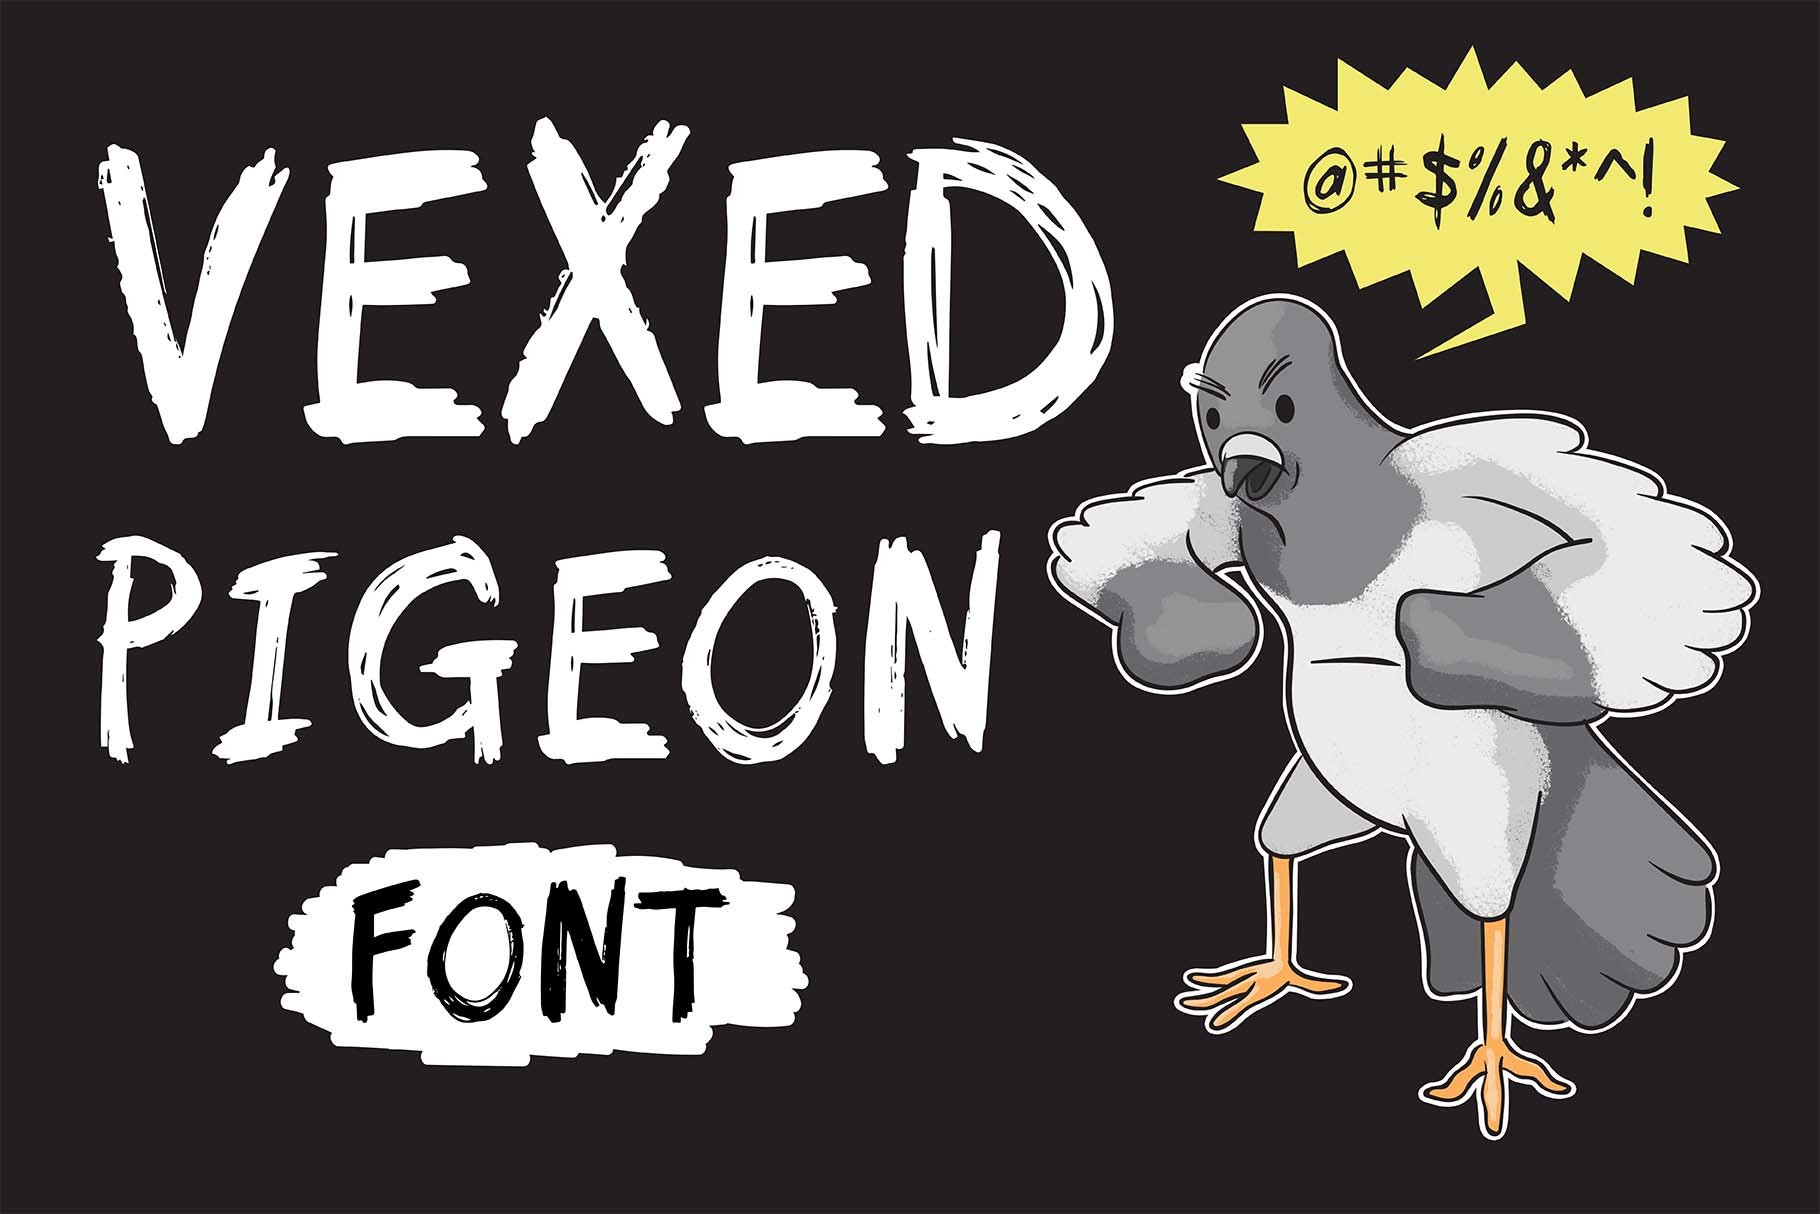 Vexed Pigeon Font cover image.